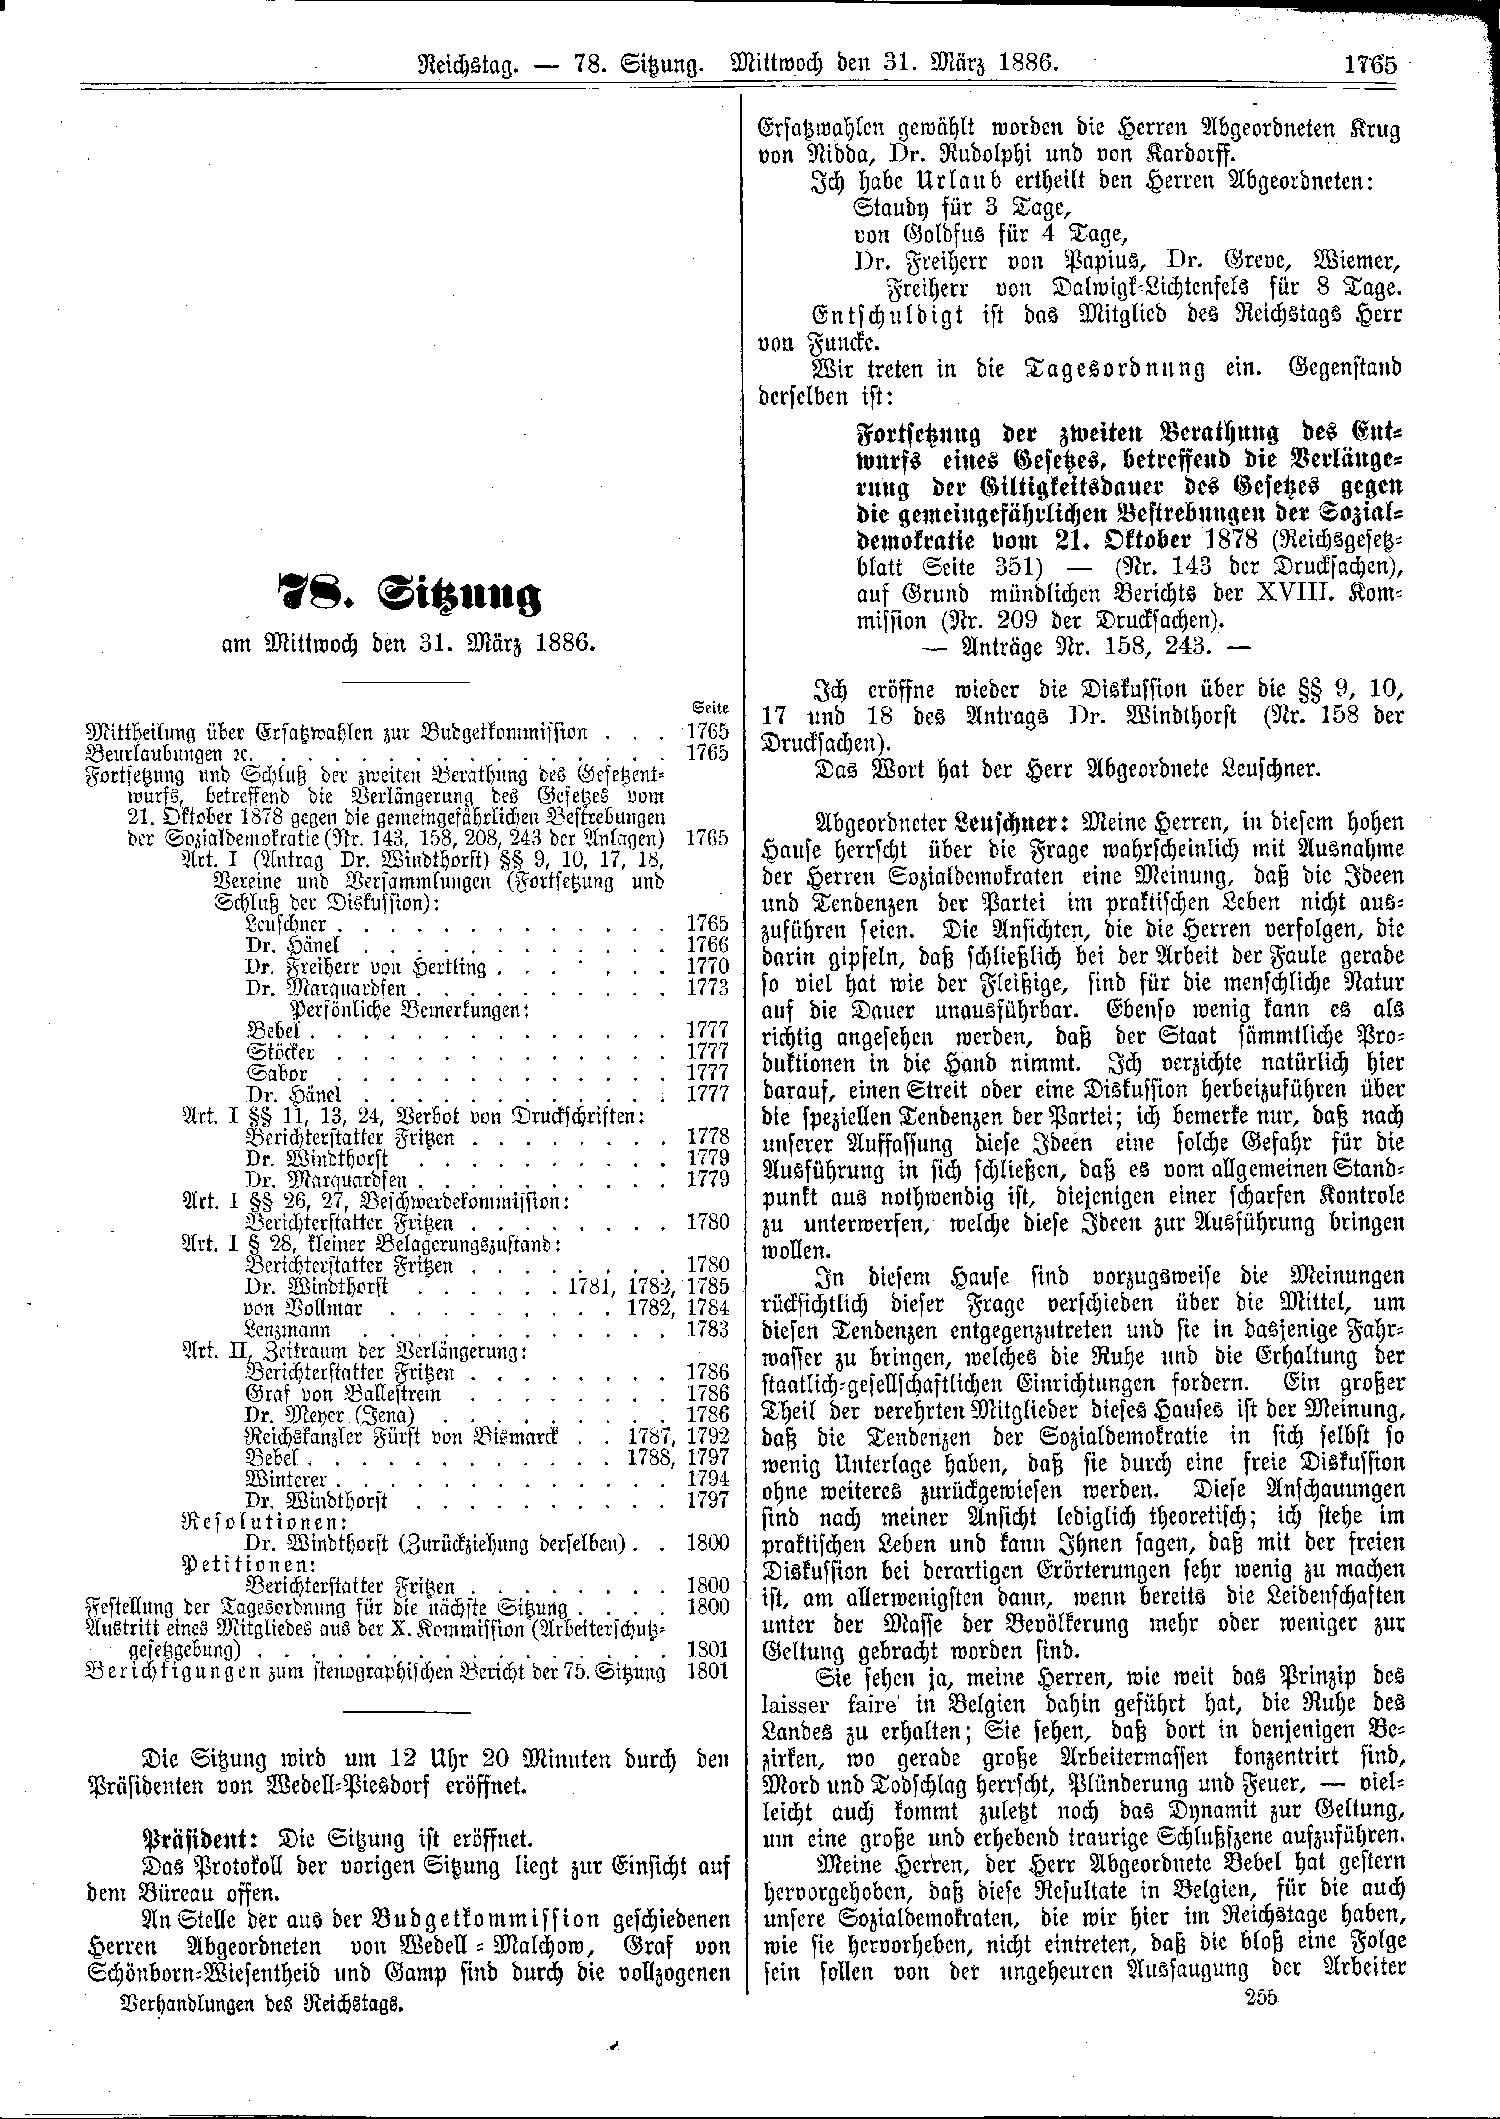 Scan of page 1765